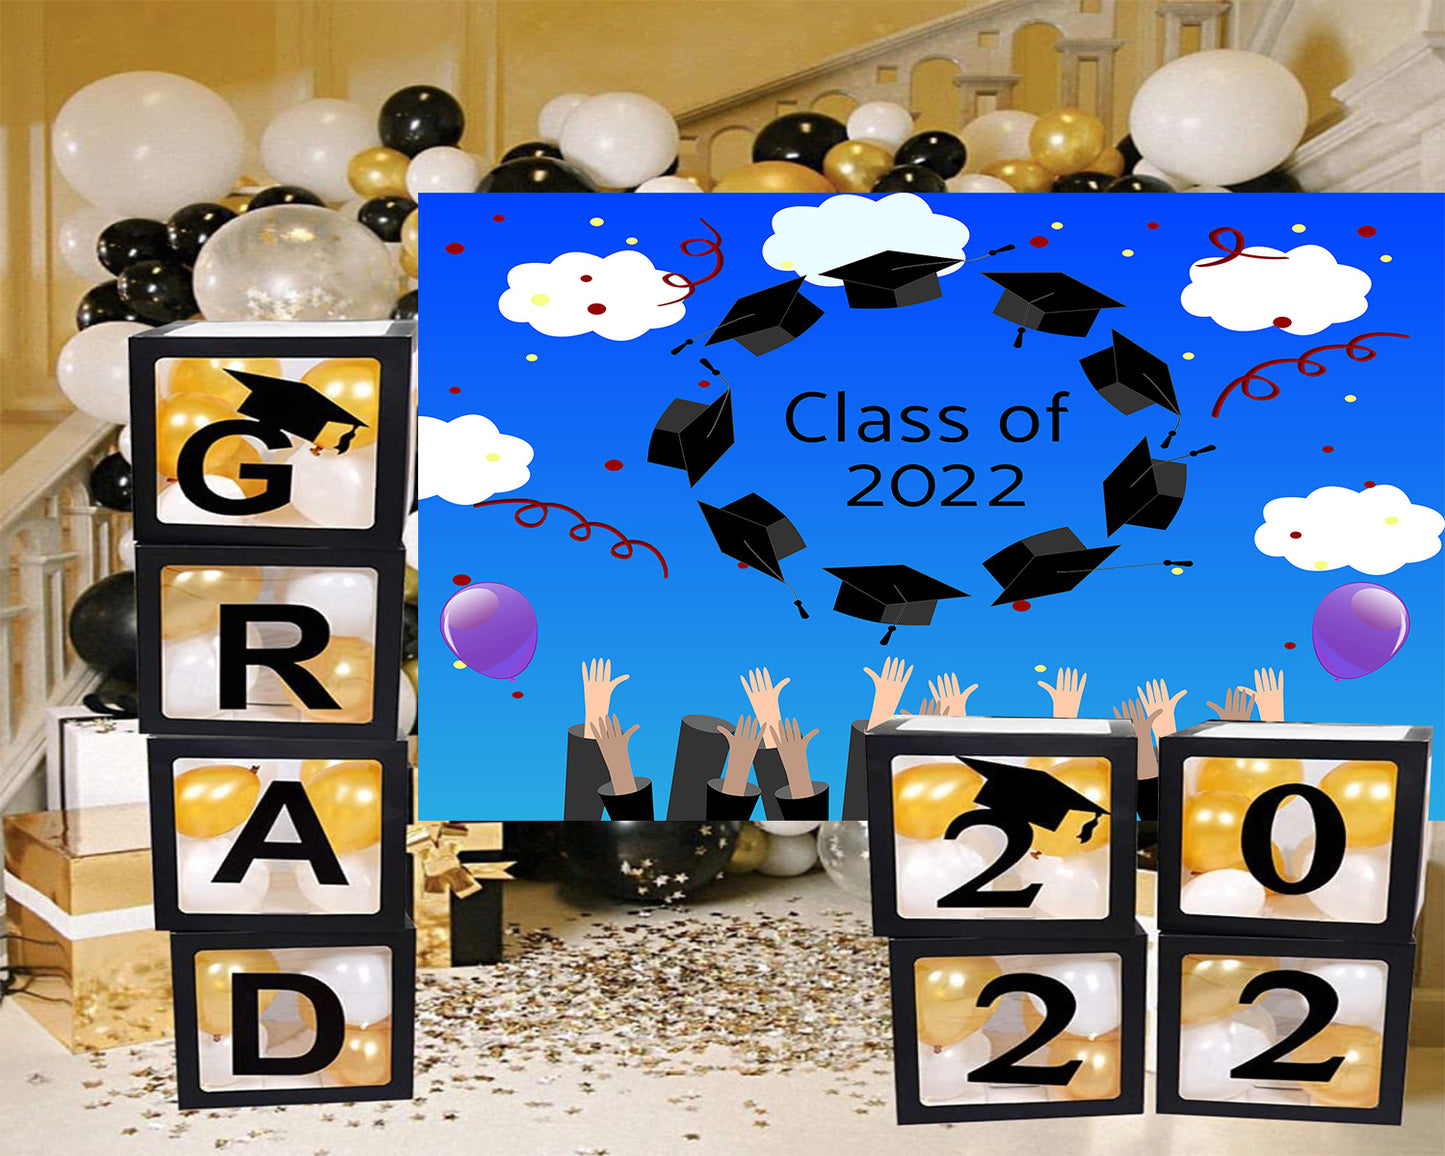 Blue Sky and White Clouds Graduation Party Backdrop for Photography Graduation Party Decorations TKH1865